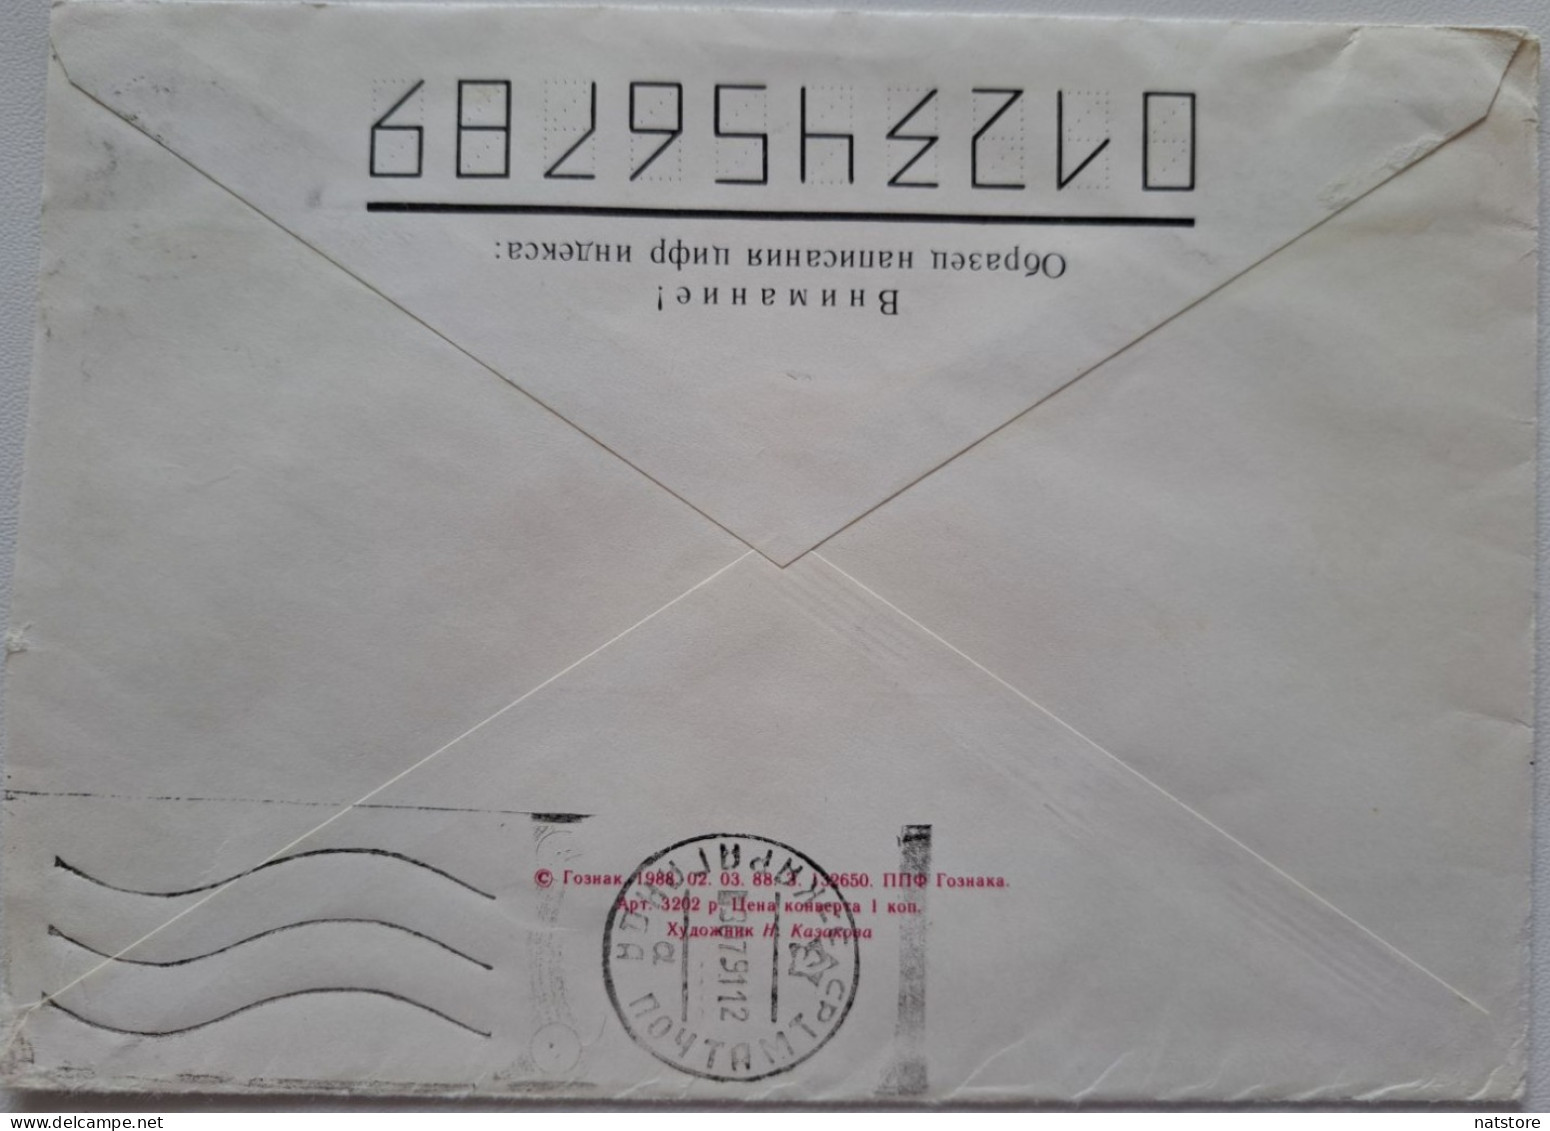 1988..USSR..COVER WITH MACHINE STAMP..PAST MAIL.. KAKHOVKA..LEGENDARY CART. - Briefe U. Dokumente